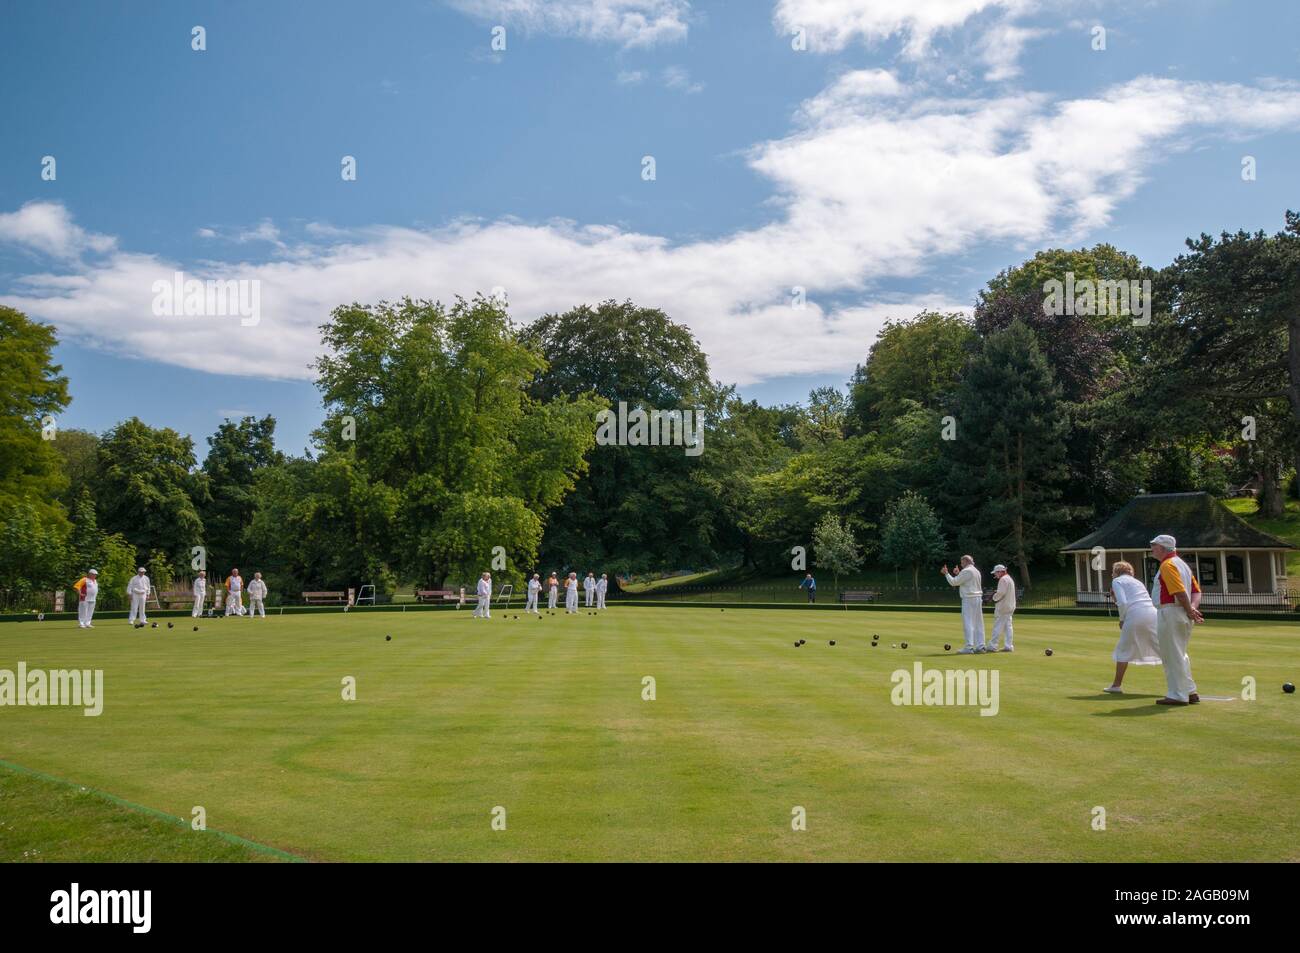 Bowlers playing Crown Green Bowls at the local bowling club in Alexandra park, Hastings, East Sussex, UK Stock Photo